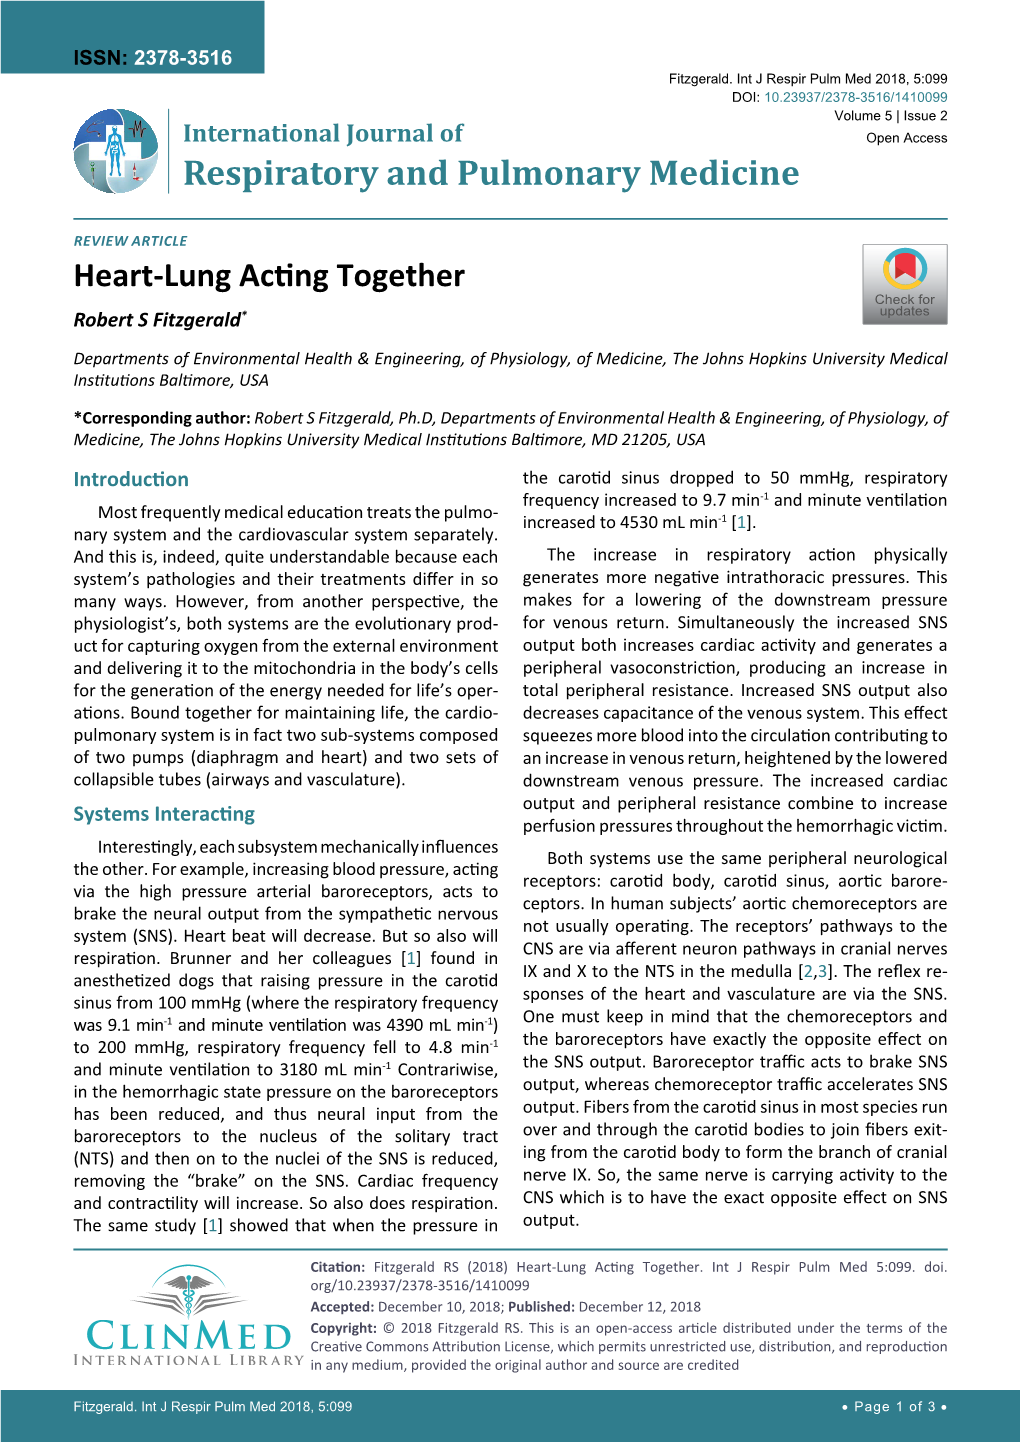 Heart-Lung Acting Together Check for Robert S Fitzgerald* Updates